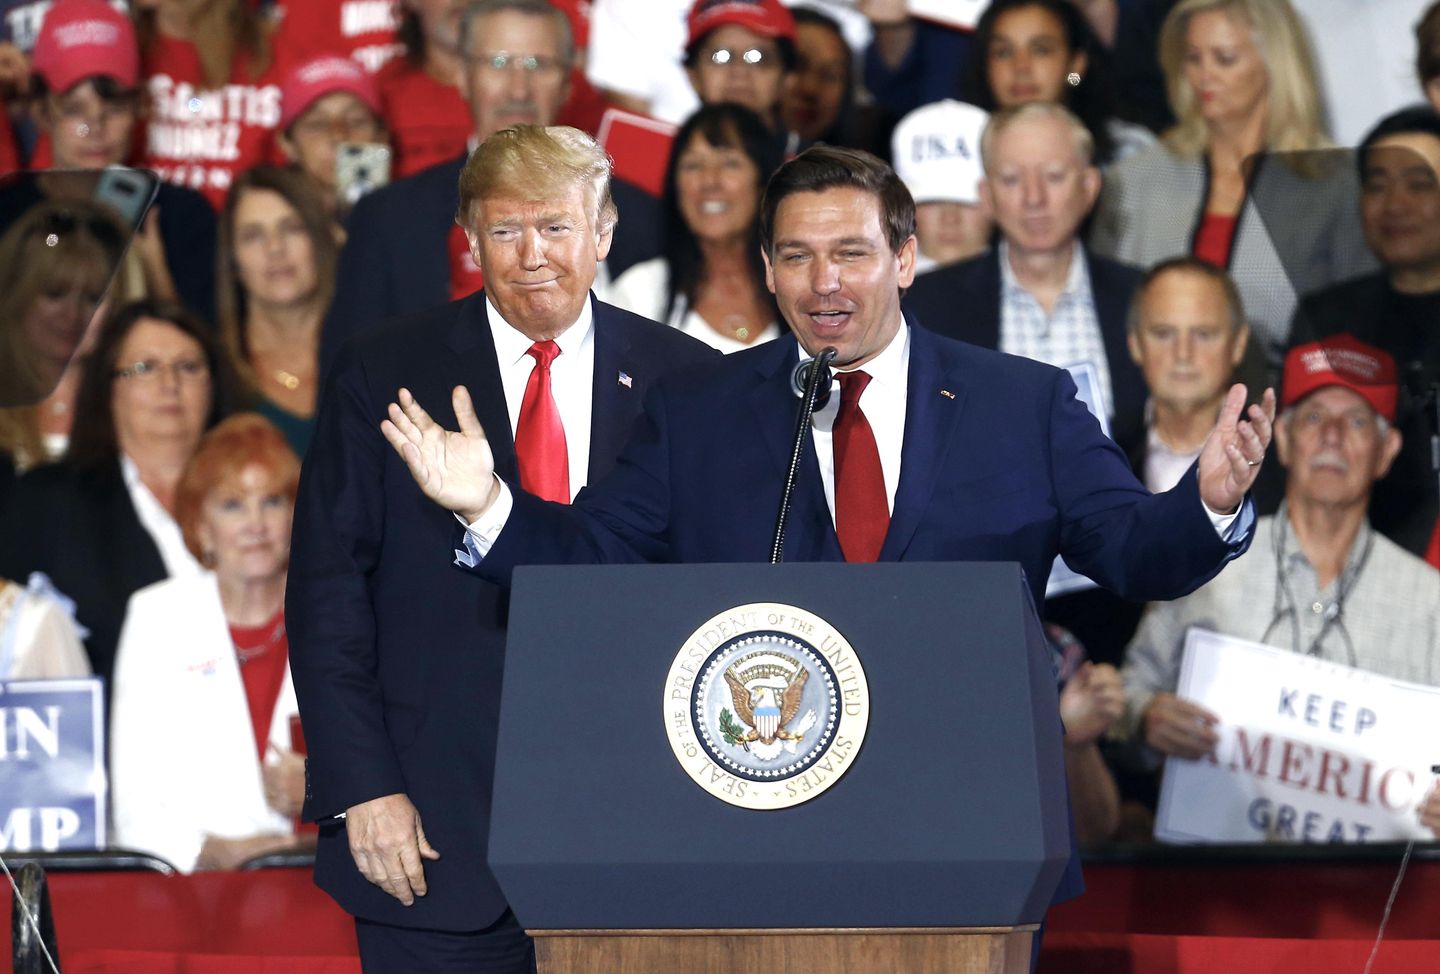 DeSantis trounces Trump in pro-life straw poll for 2024 presidential race